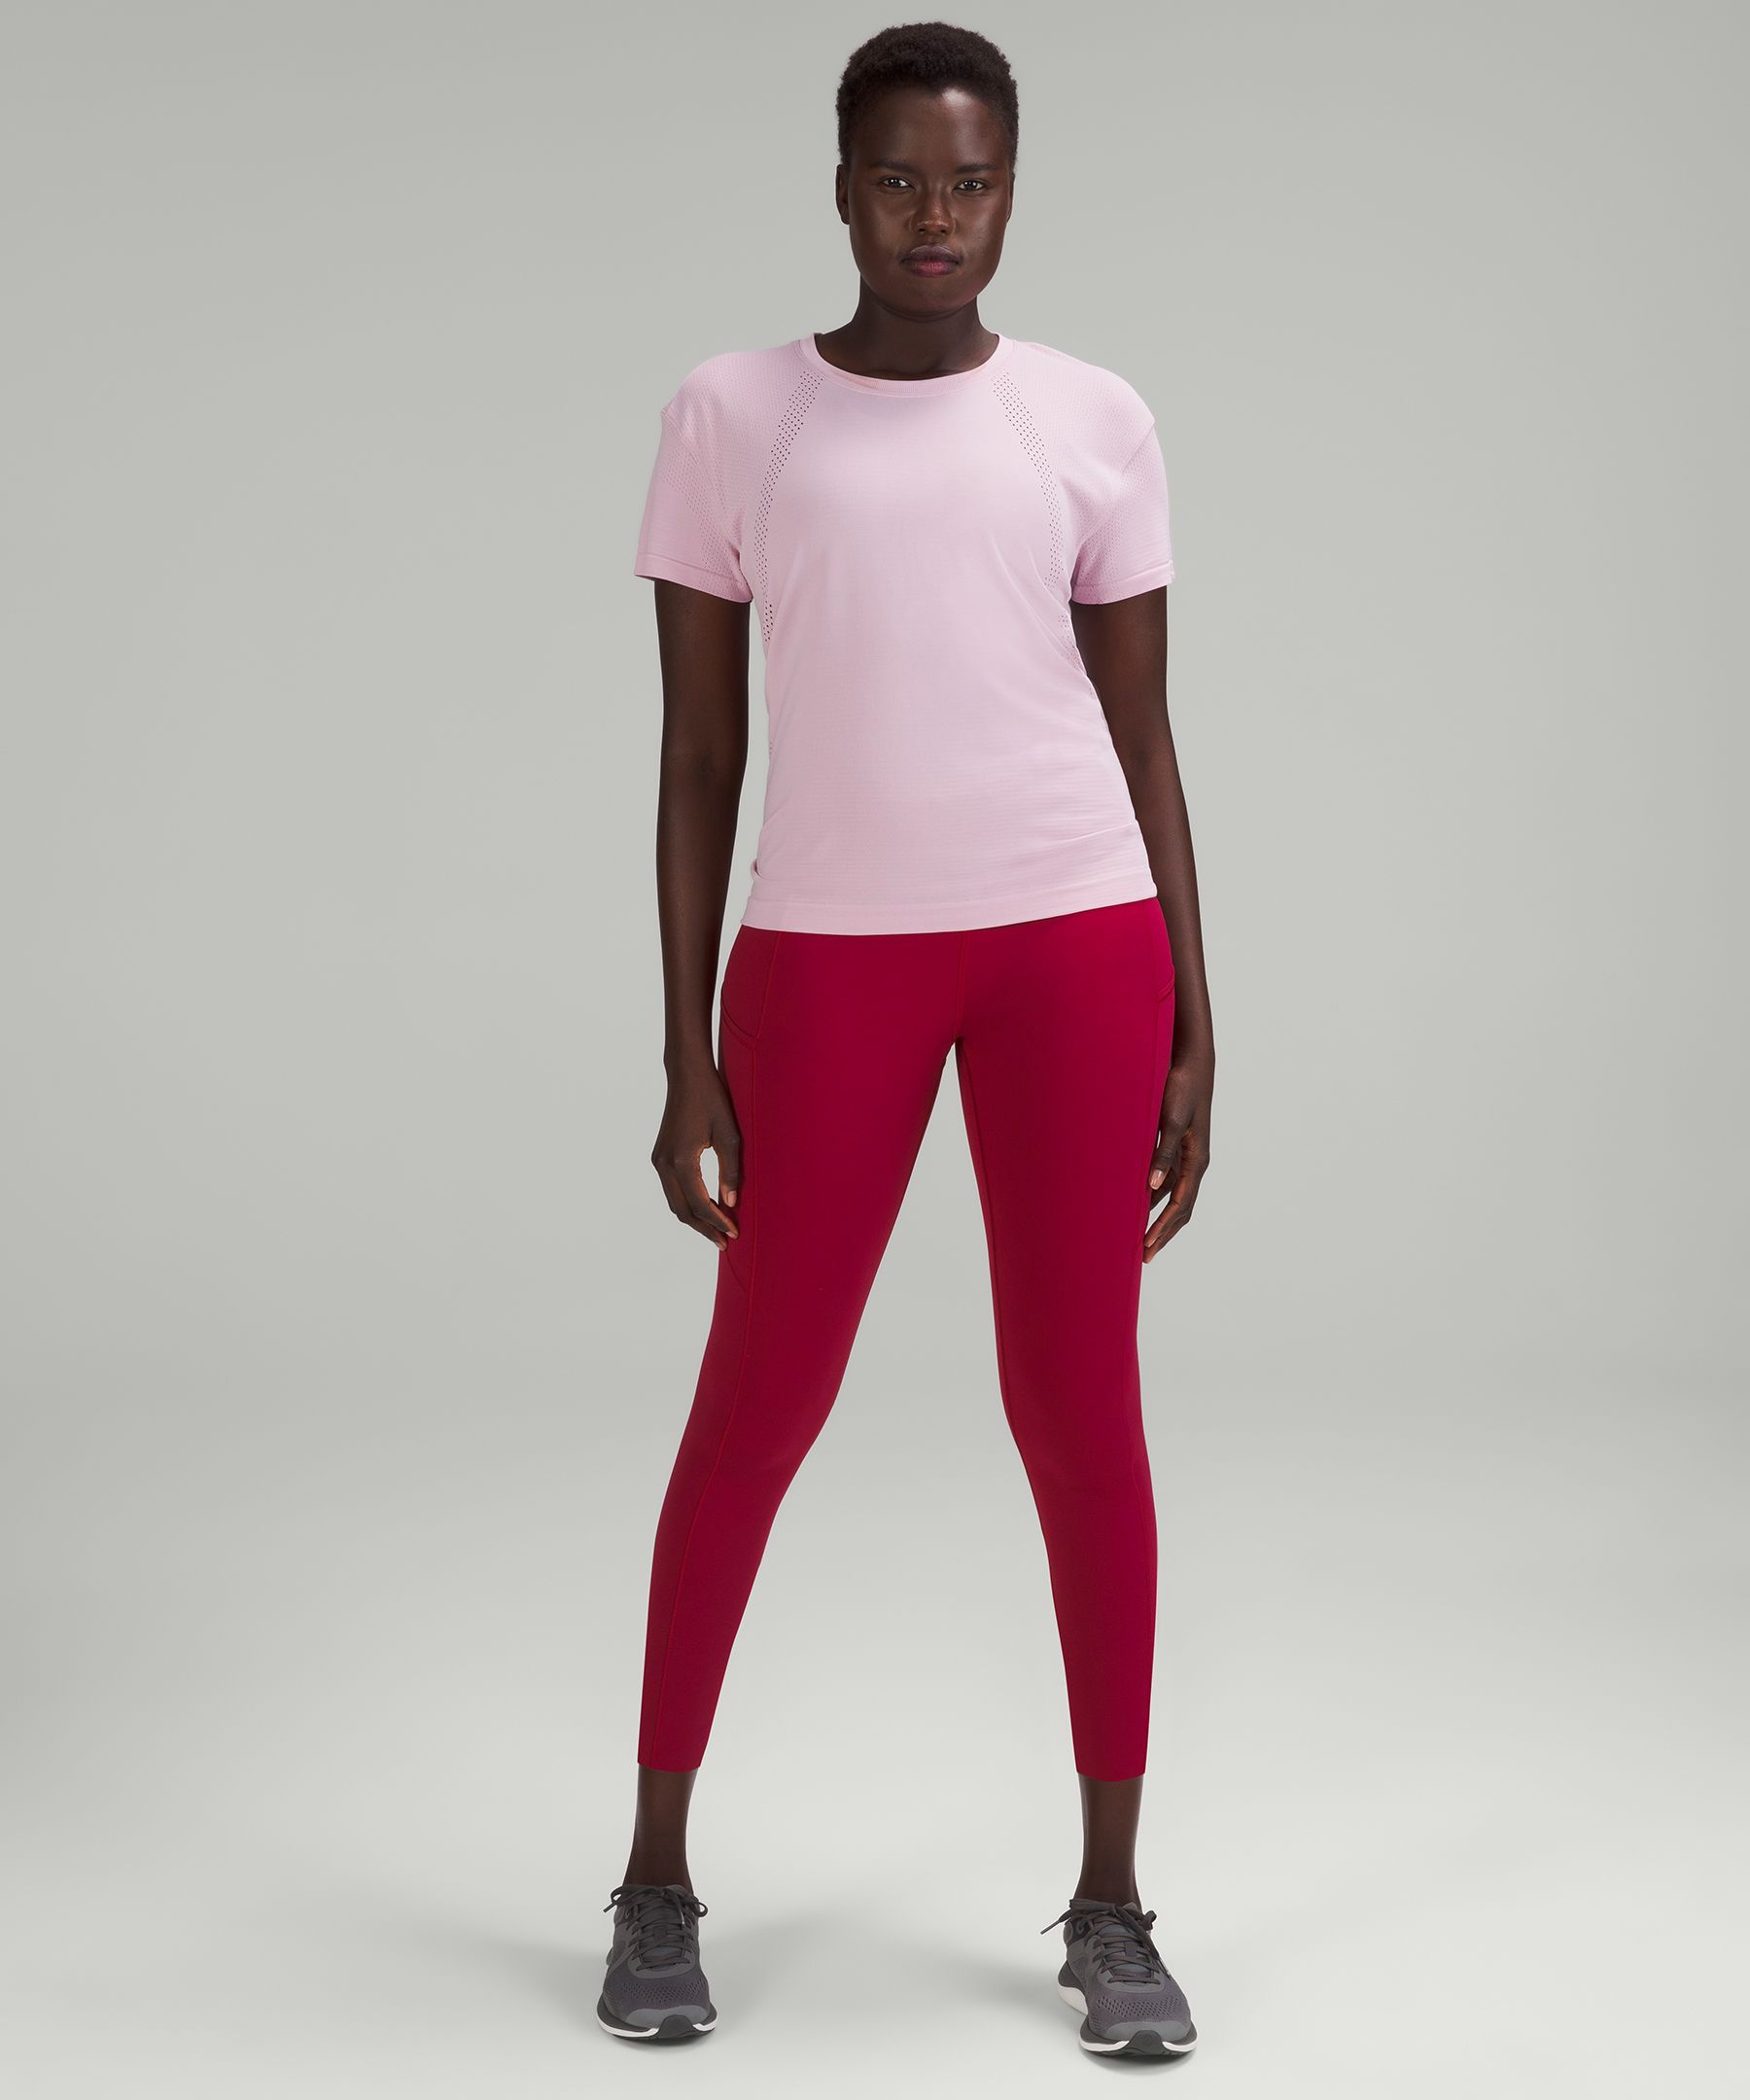 Fast and Free High-Rise Tight 25, Leggings